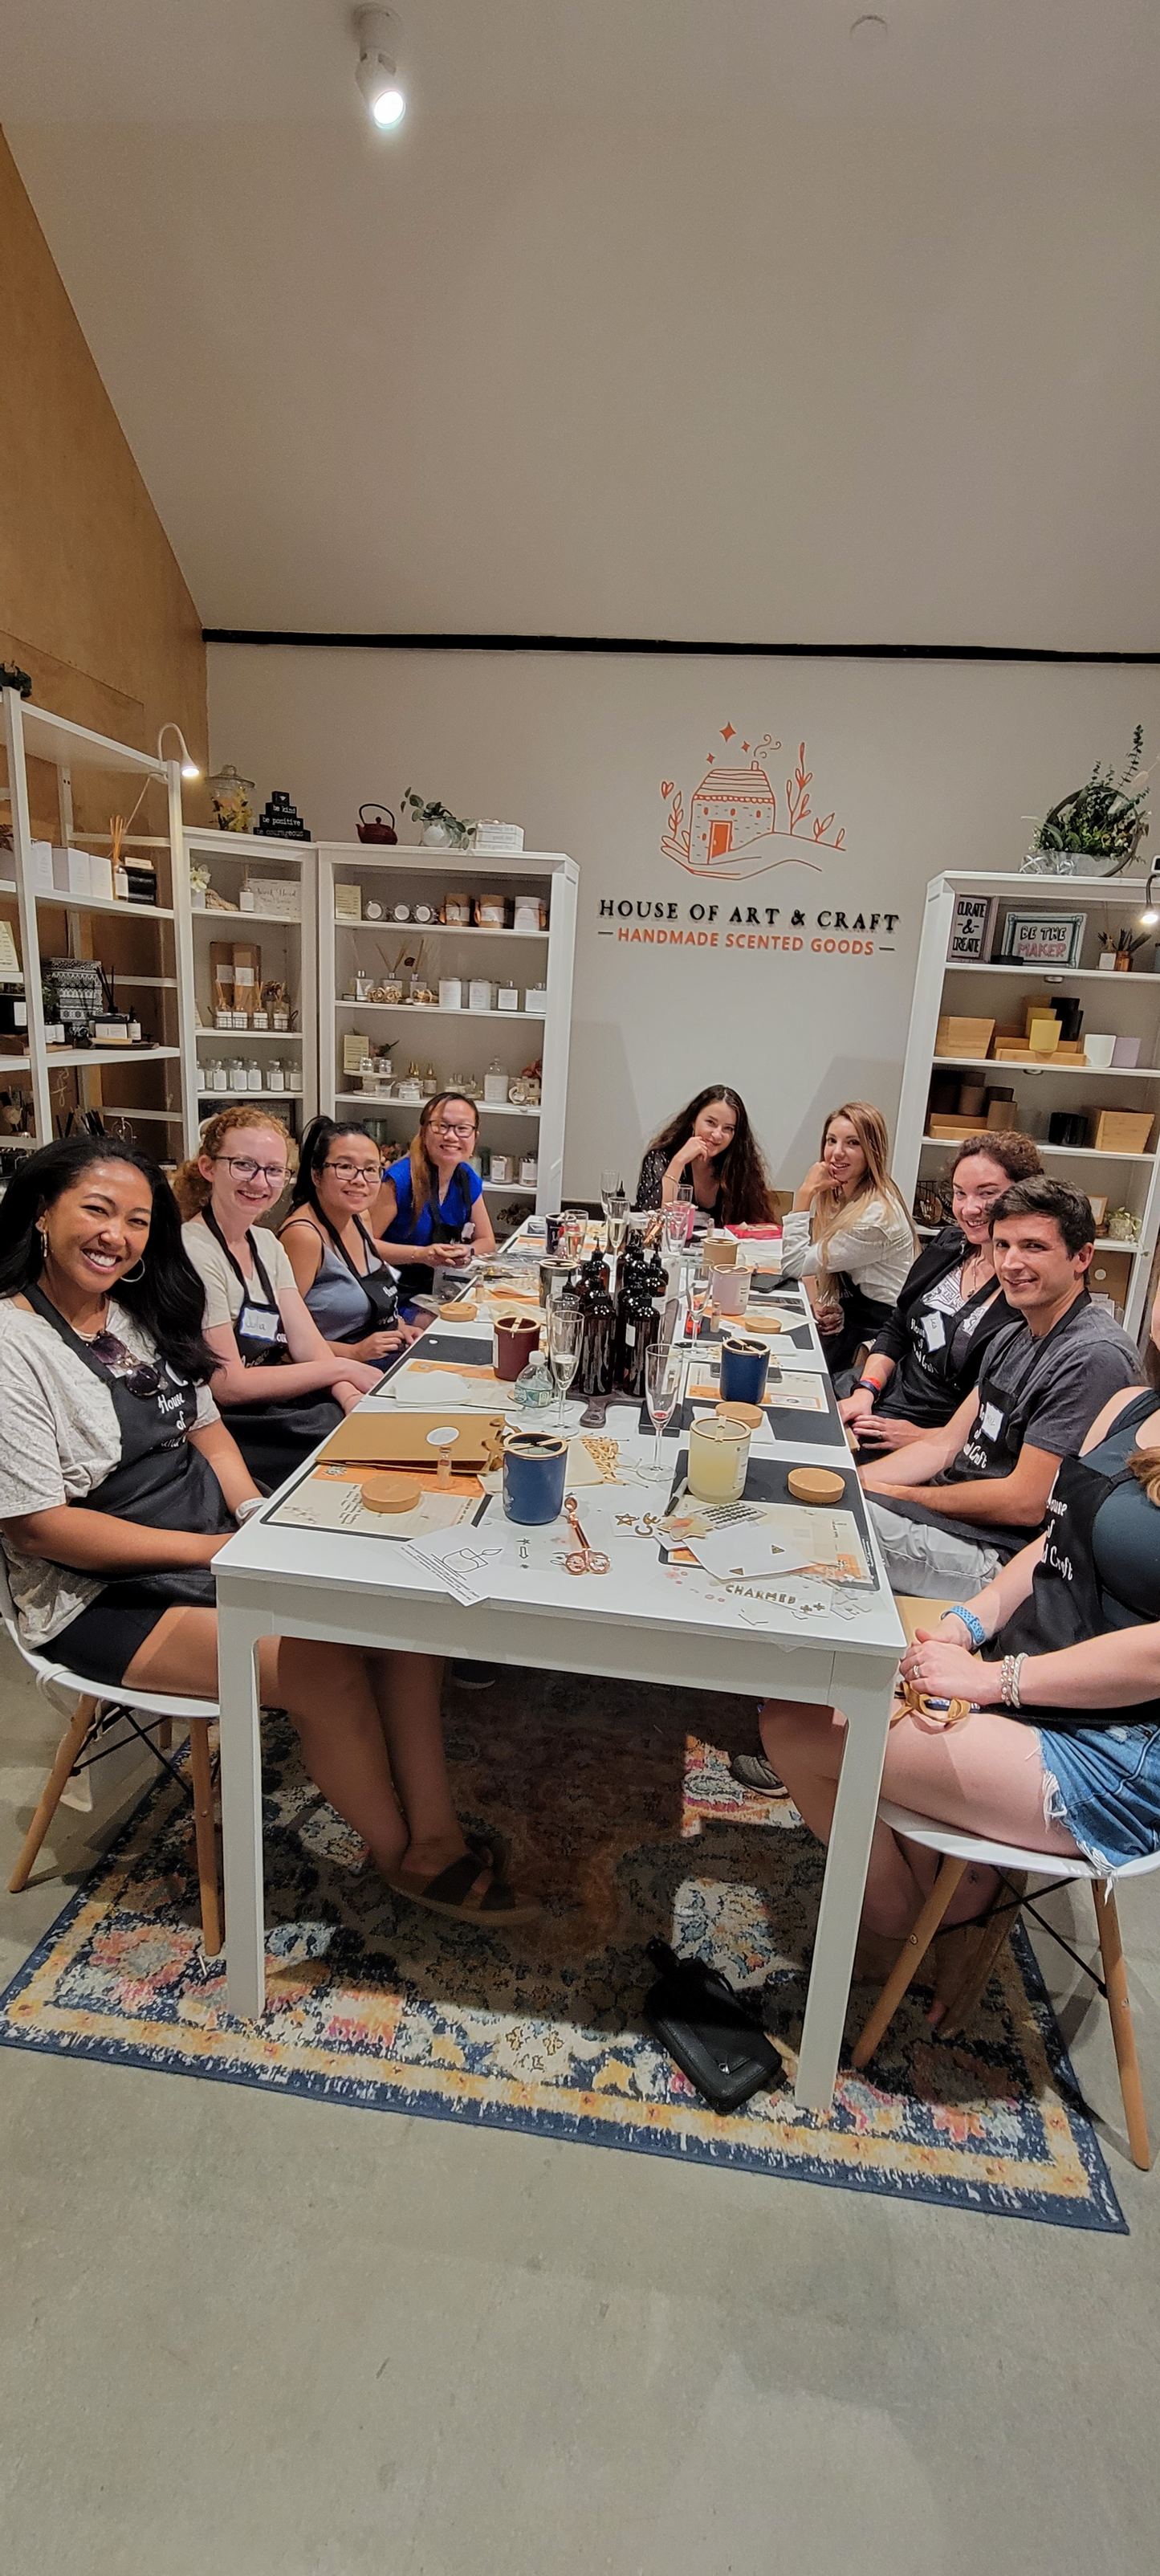 Private Group Candle Making Workshop Additional Guest